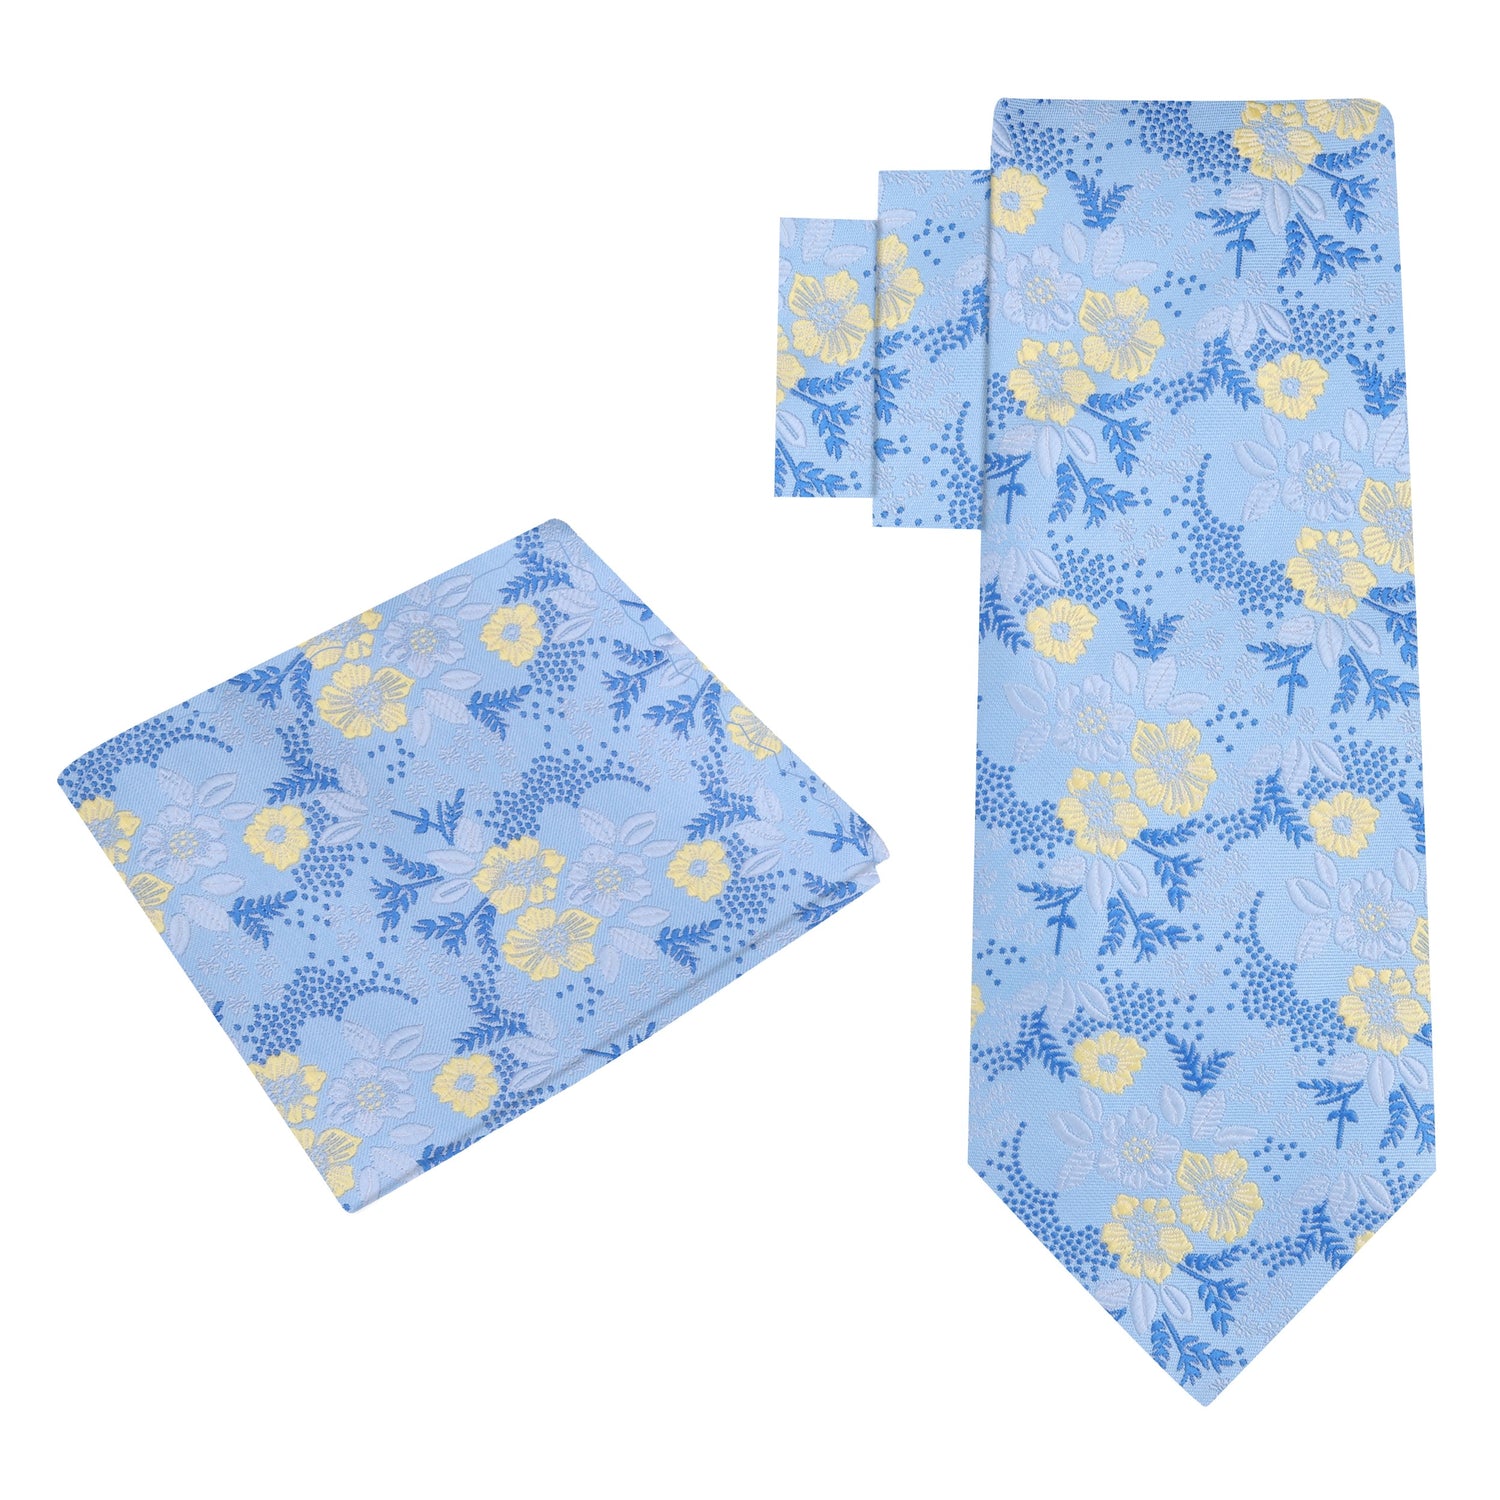 Alt View: Light Blue, Blue, Light Yellow Floral Tie and Pocket Square